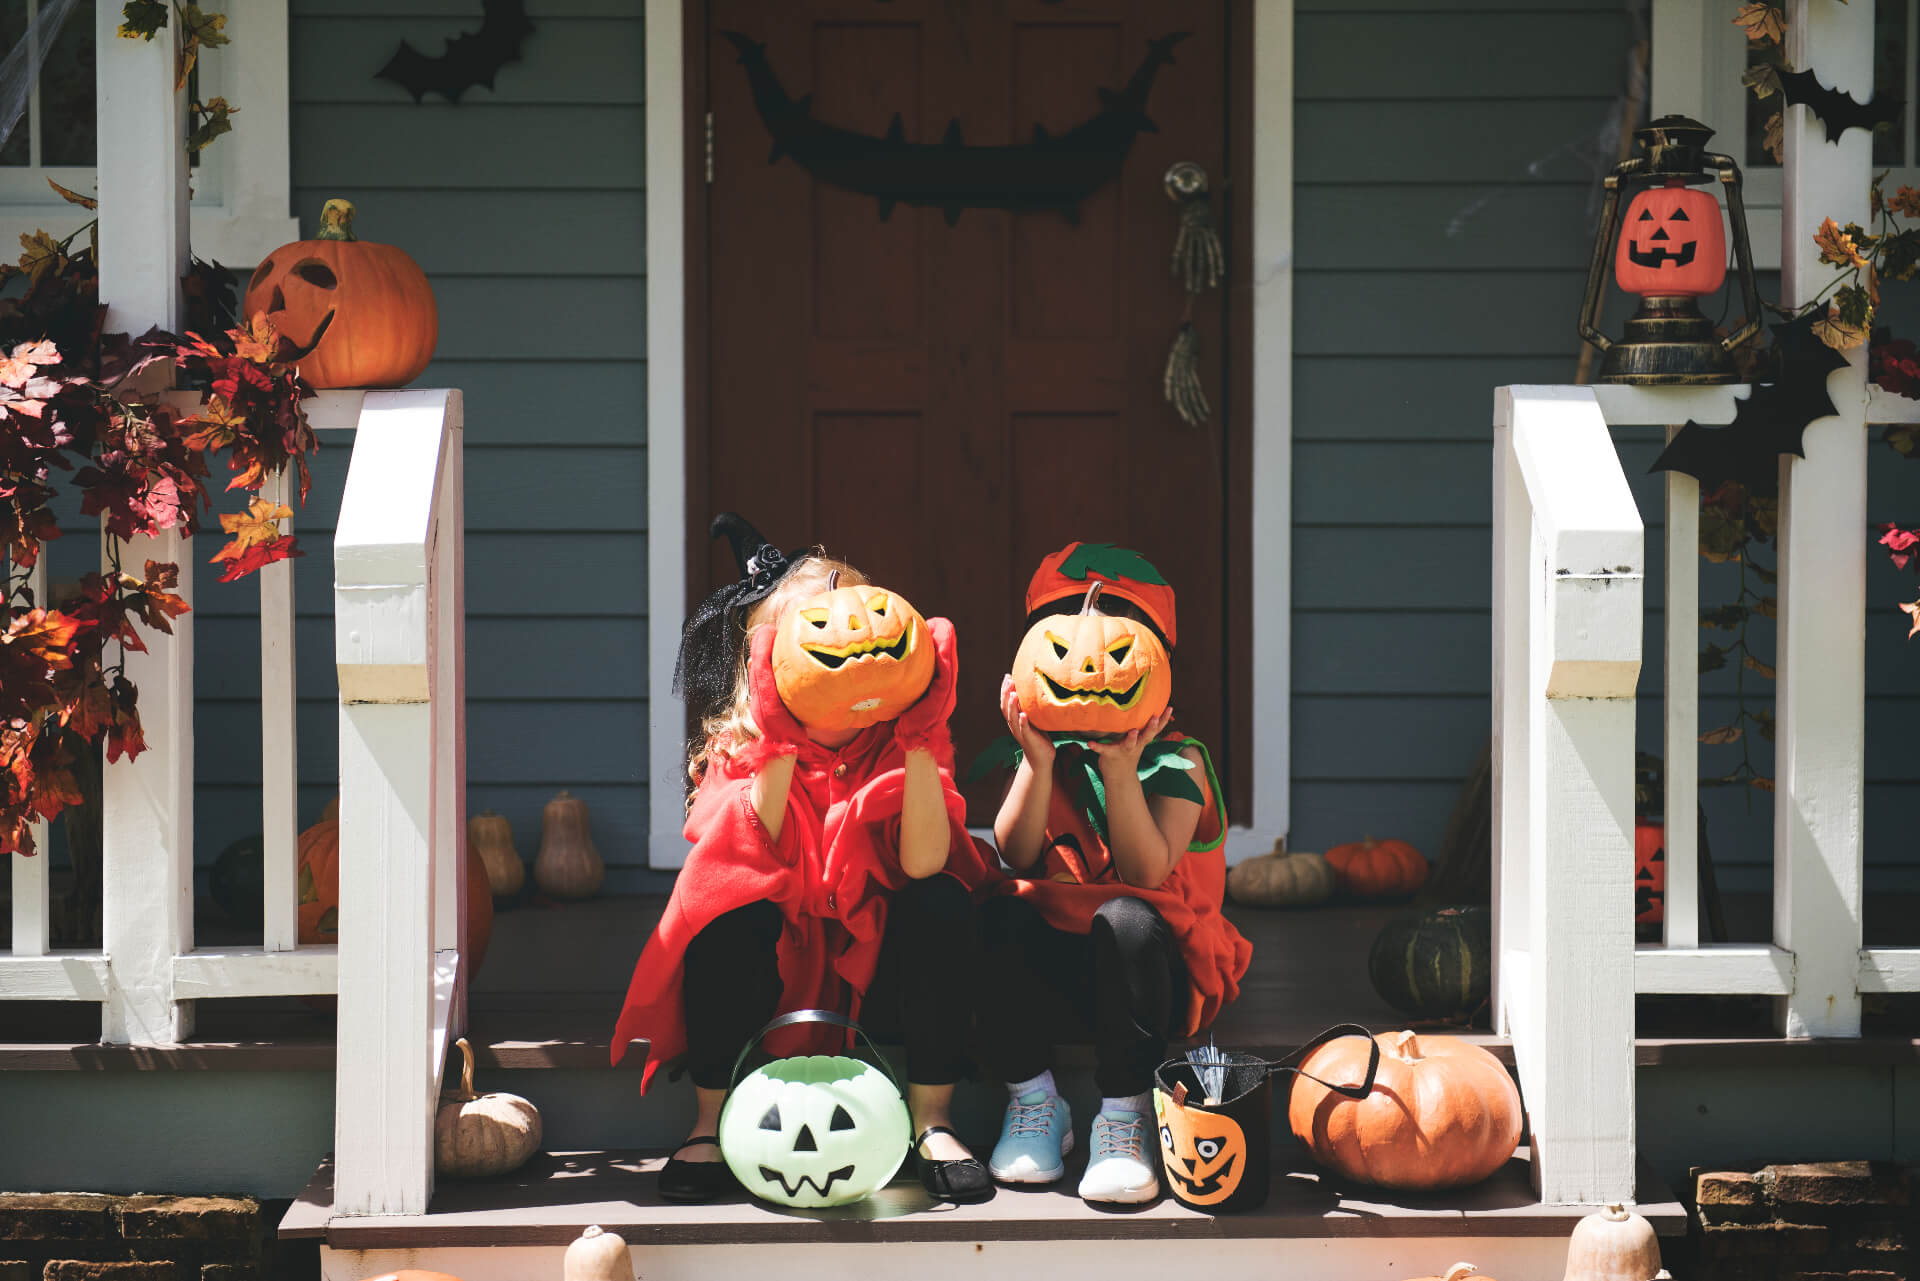 Transform your home into a spooky place with DIY Halloween decoration ideas, including pumpkin carving and eerie faces.